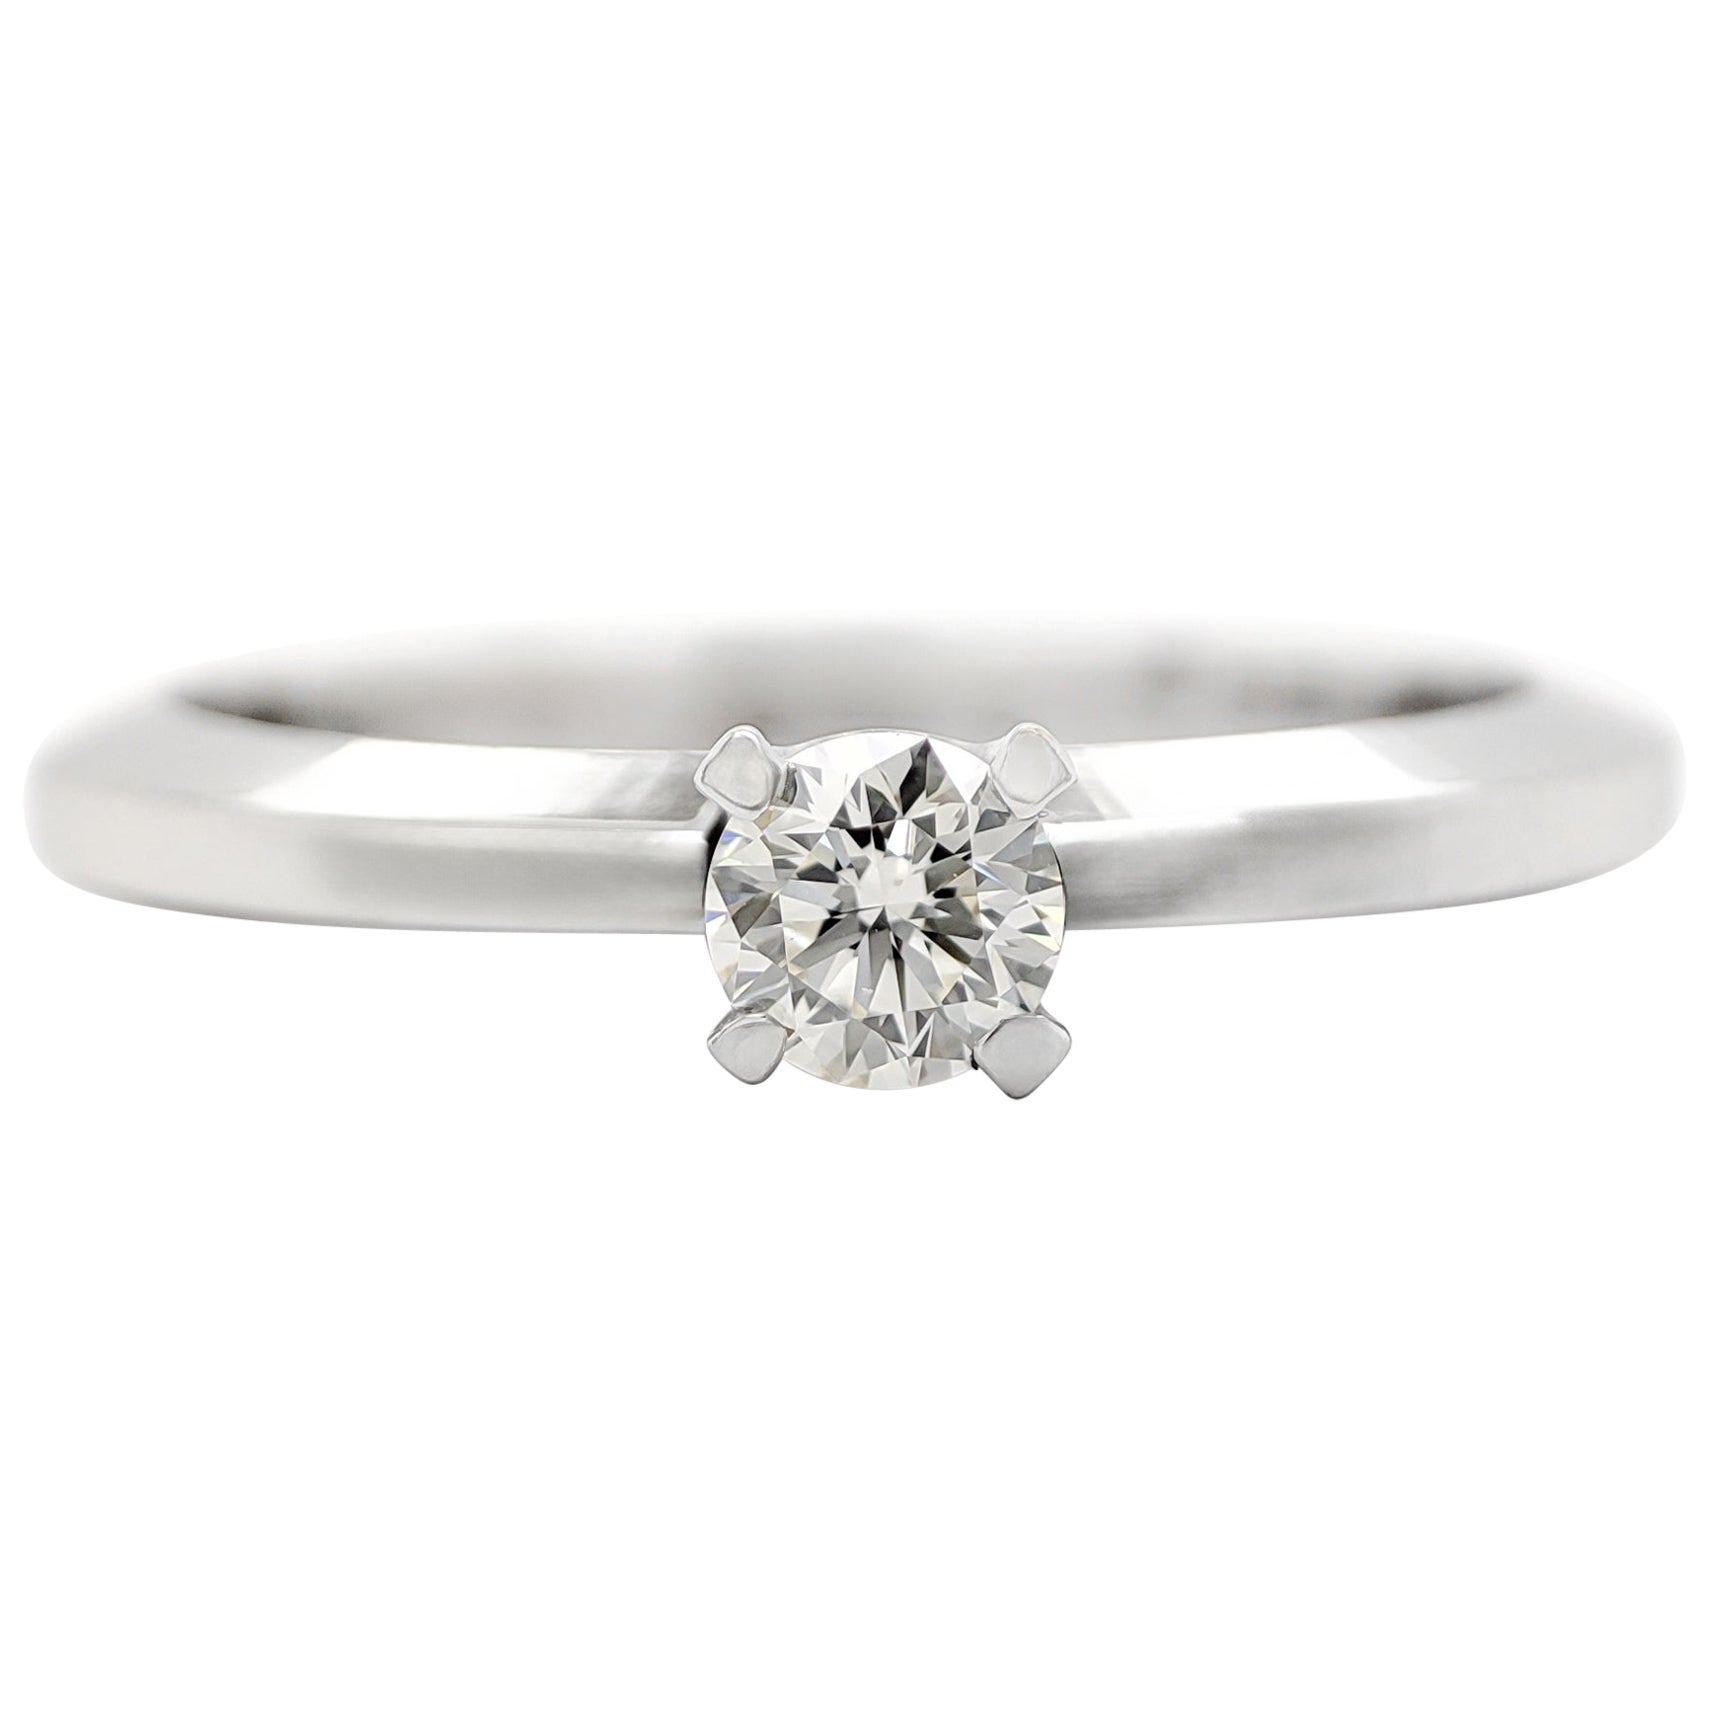 NO RESERVE 0.20CT Round Diamond Solitaire Engagement Ring 14K White Gold For Sale